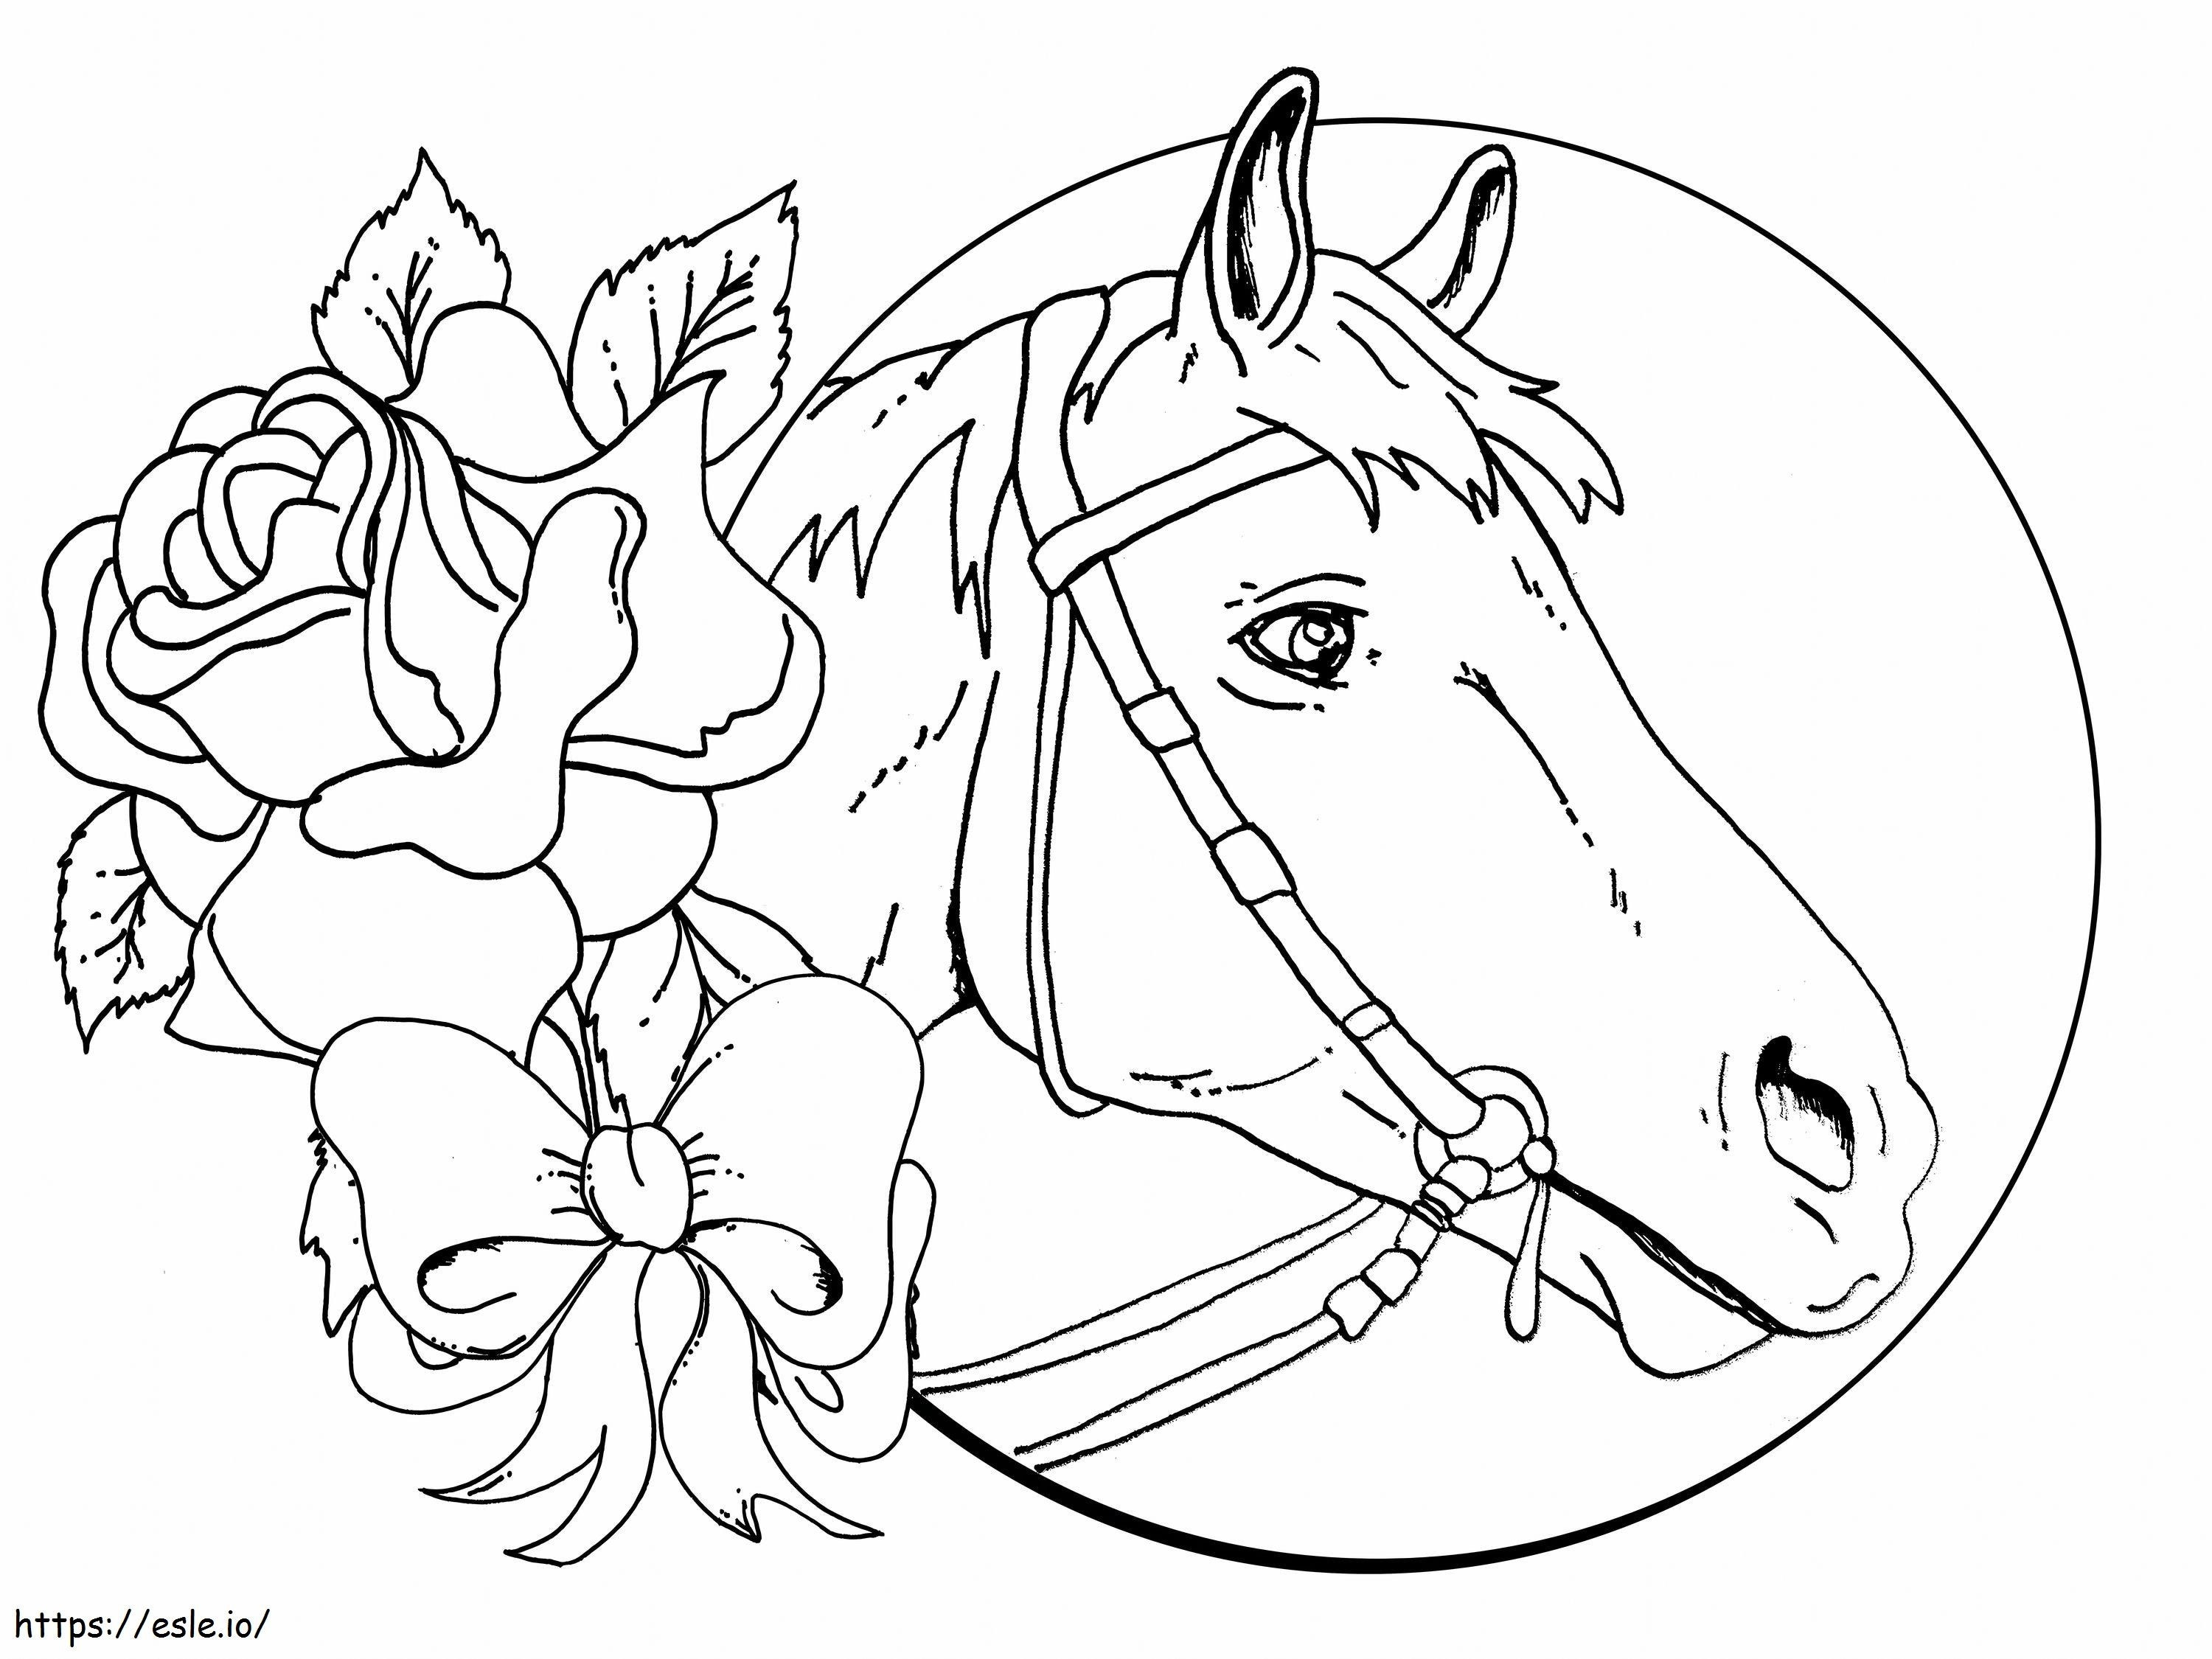 1541811567 Top 48 Free Printable Horse Online Craft Throughout Color Cute coloring page